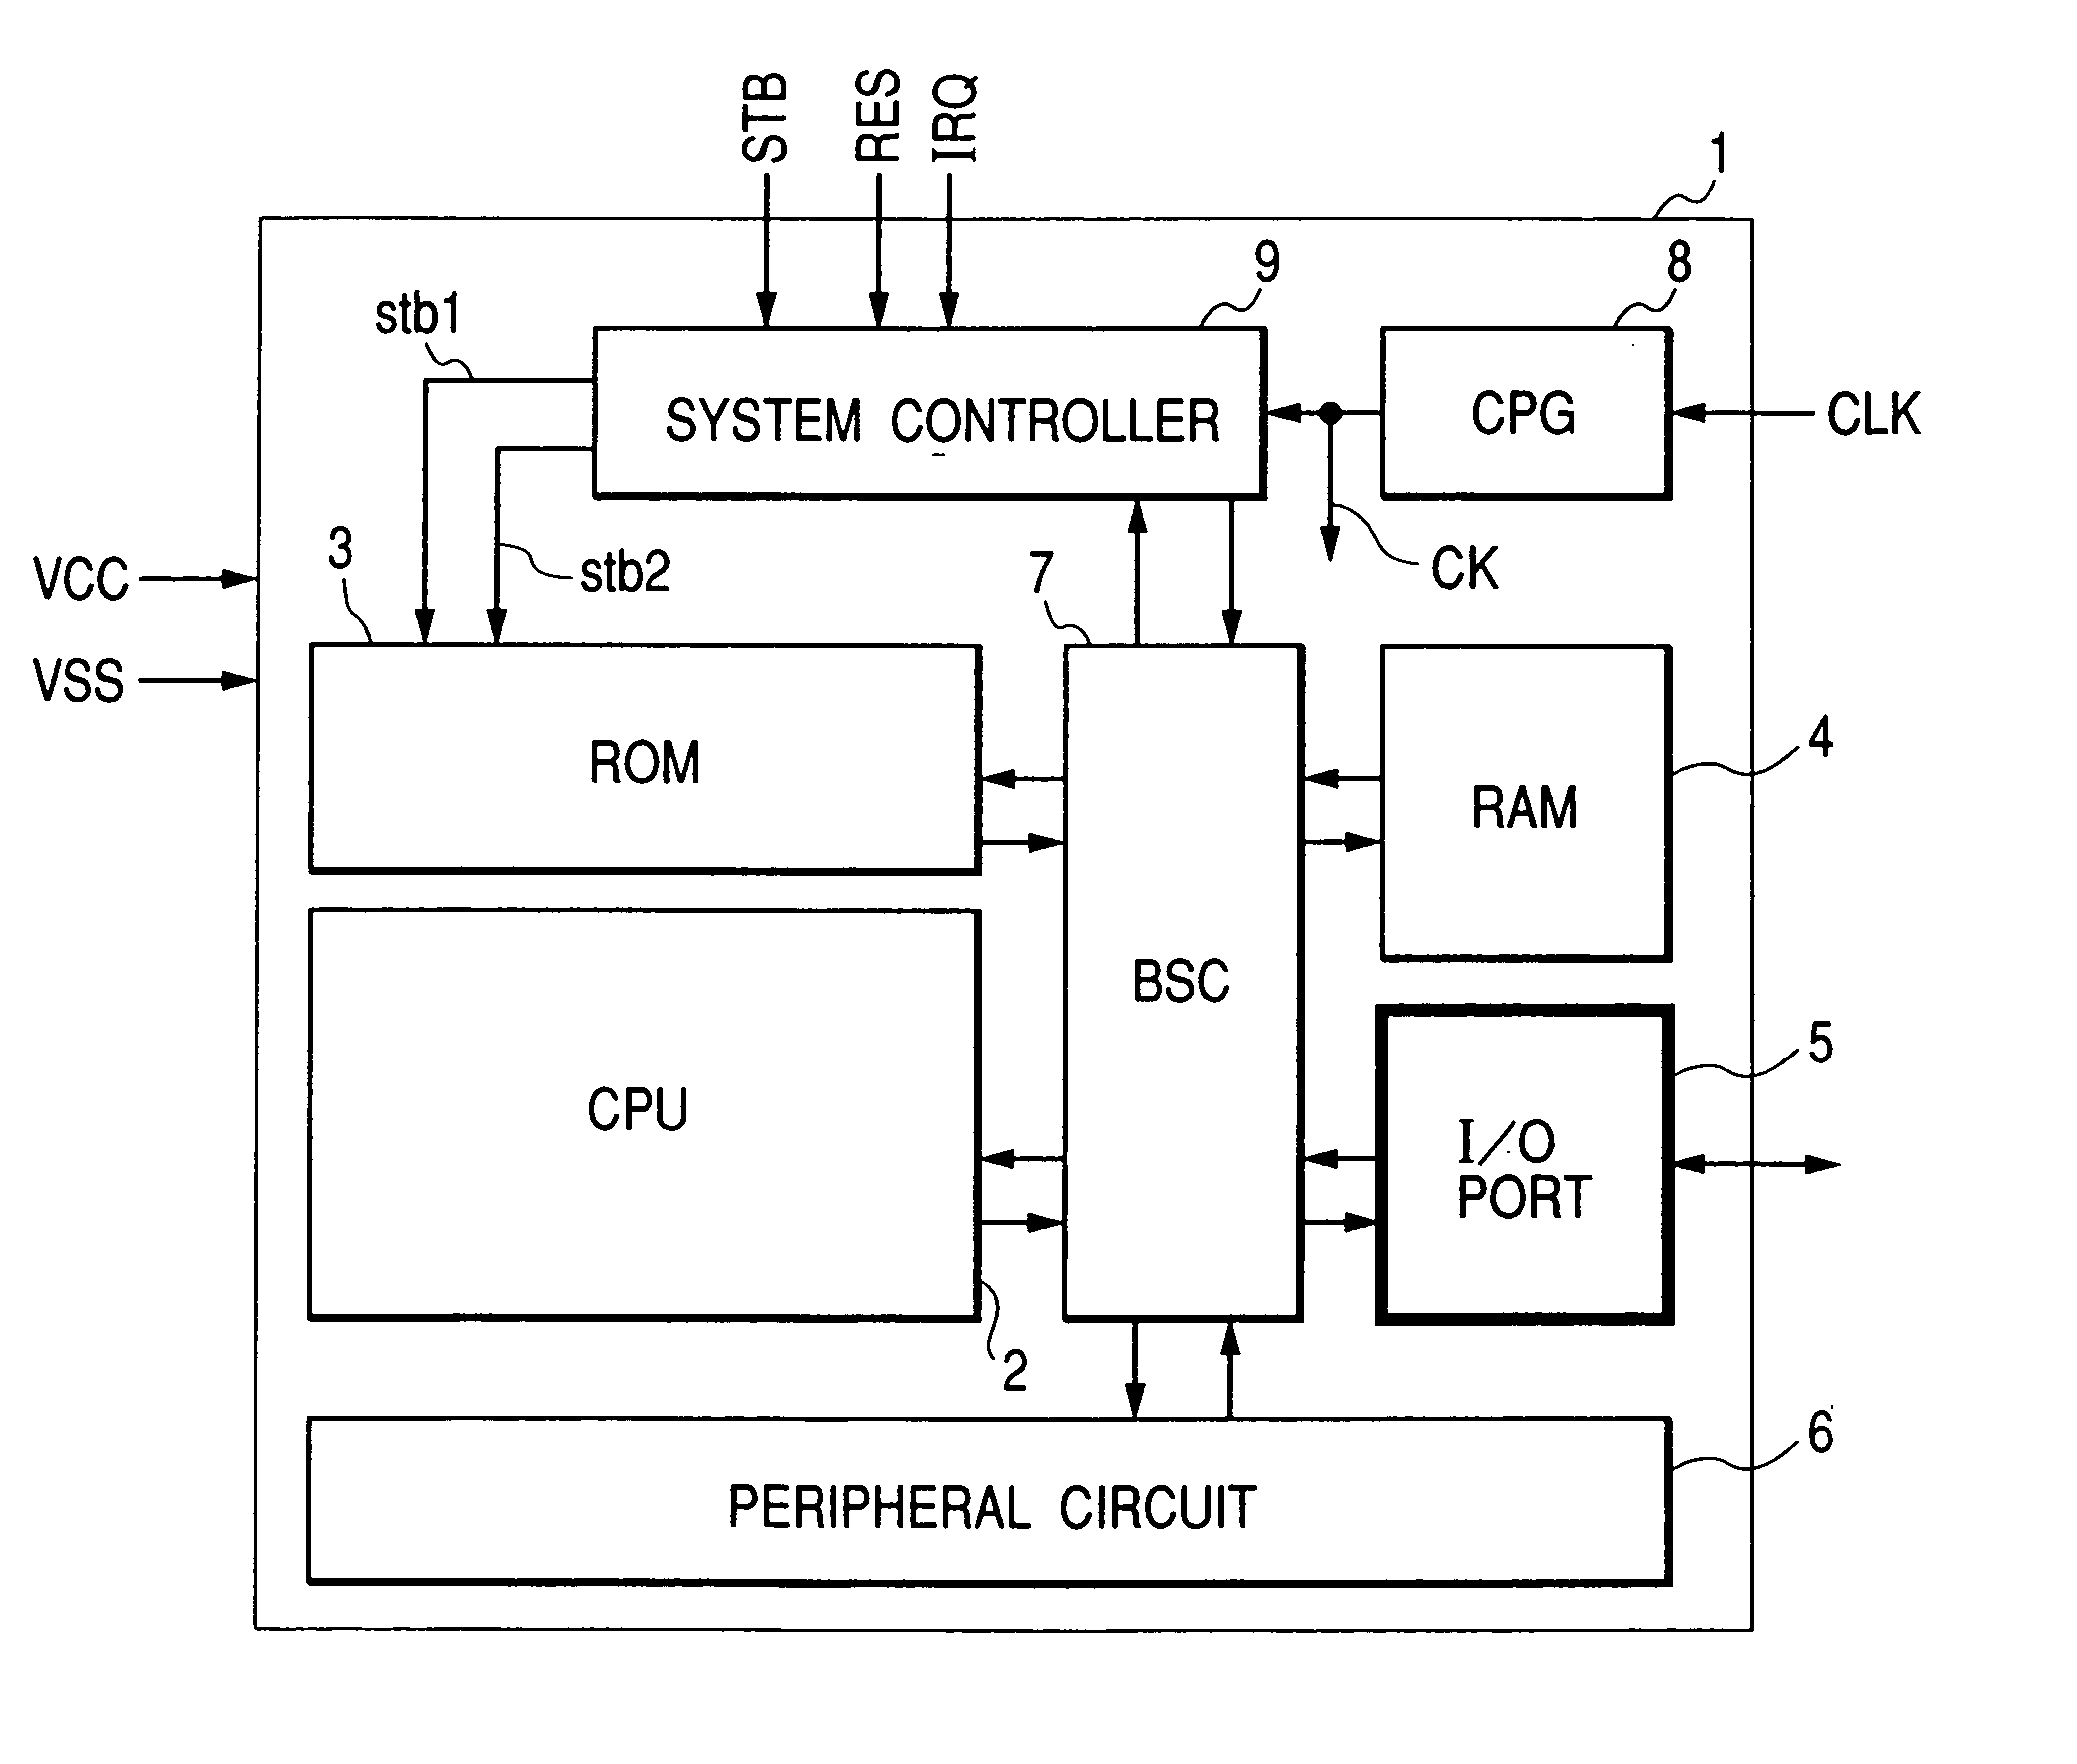 Semiconductor integrated circuit and IC card